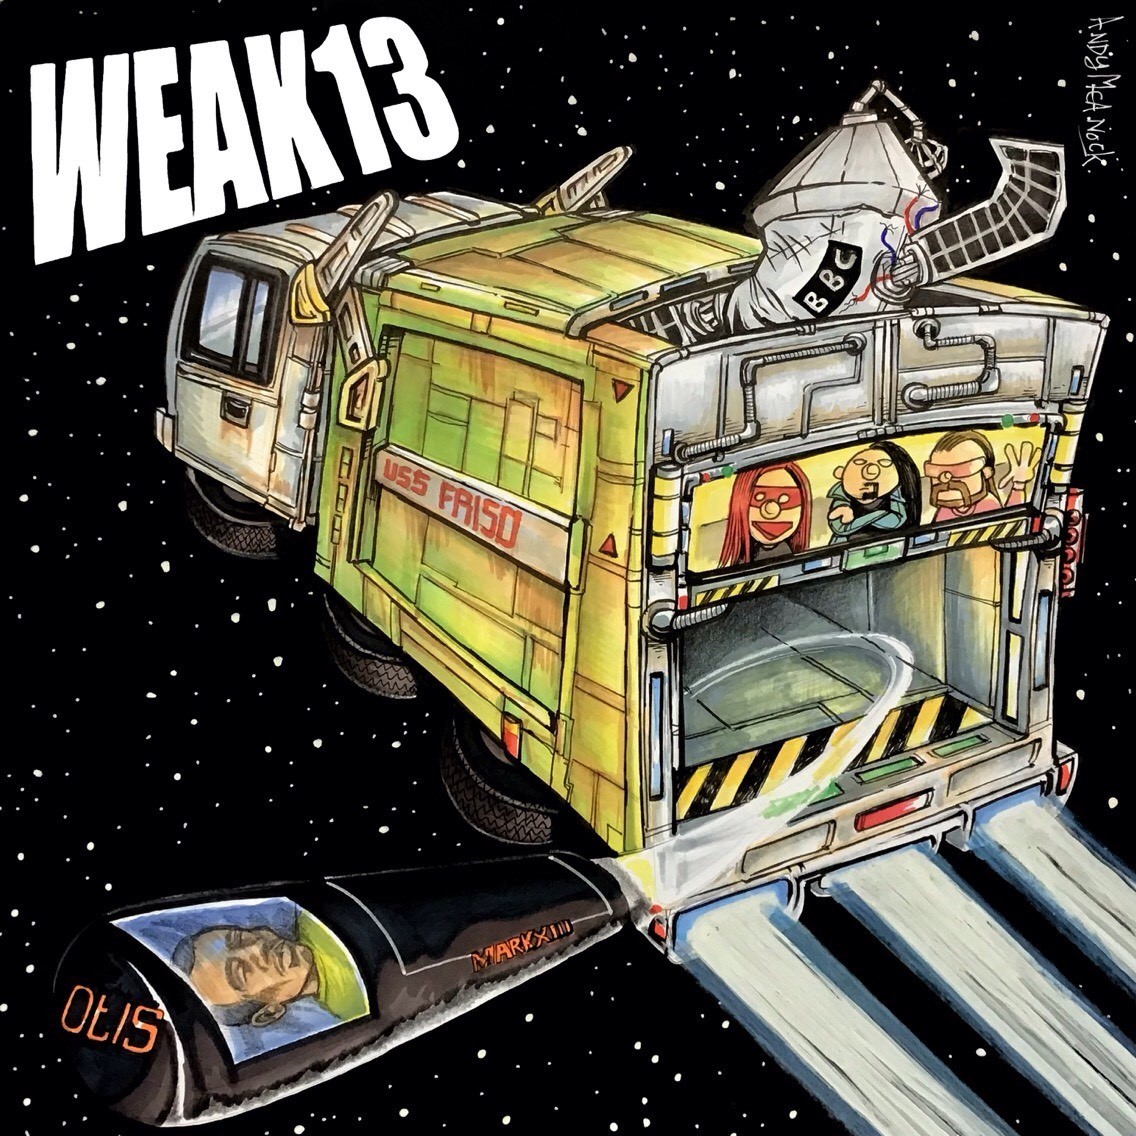 WEAK13 cover art by Worcestershire artist Andy Meanock